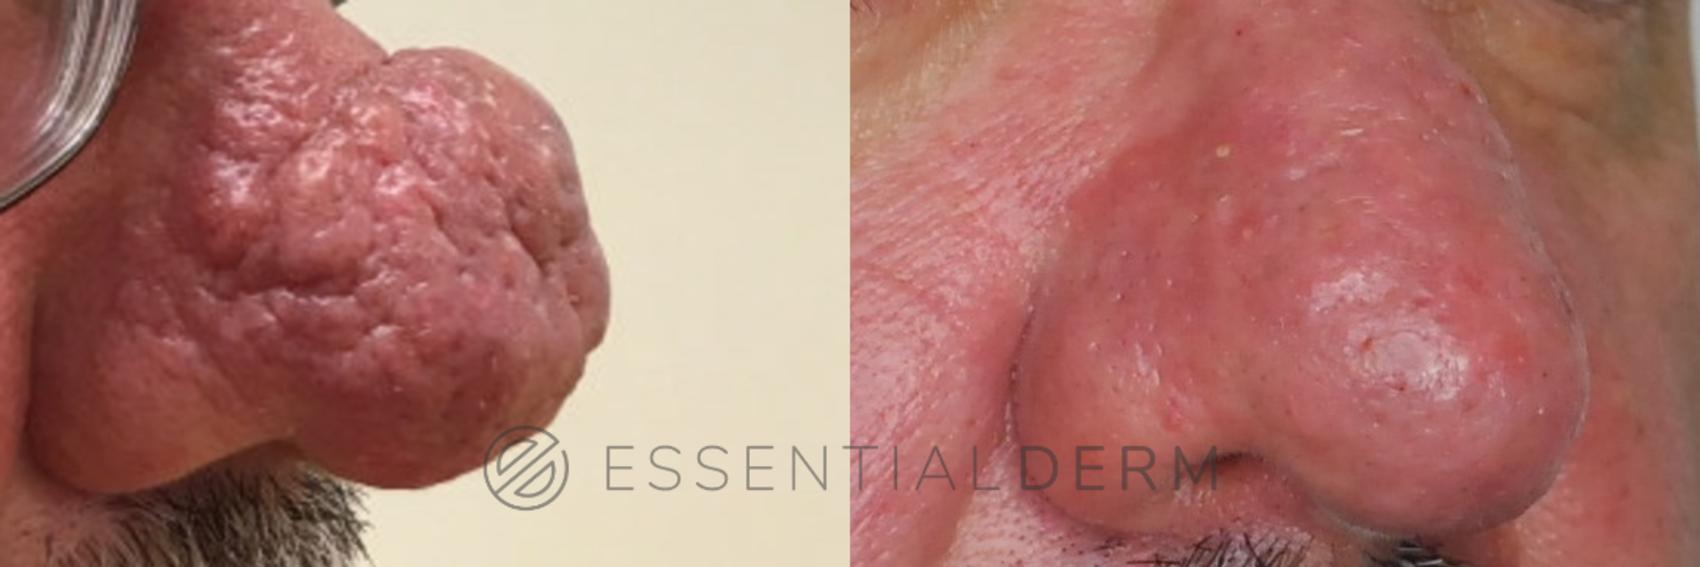 Rhinophyma Case 21 Before & After Right Side | Natick, MA | Essential Dermatology